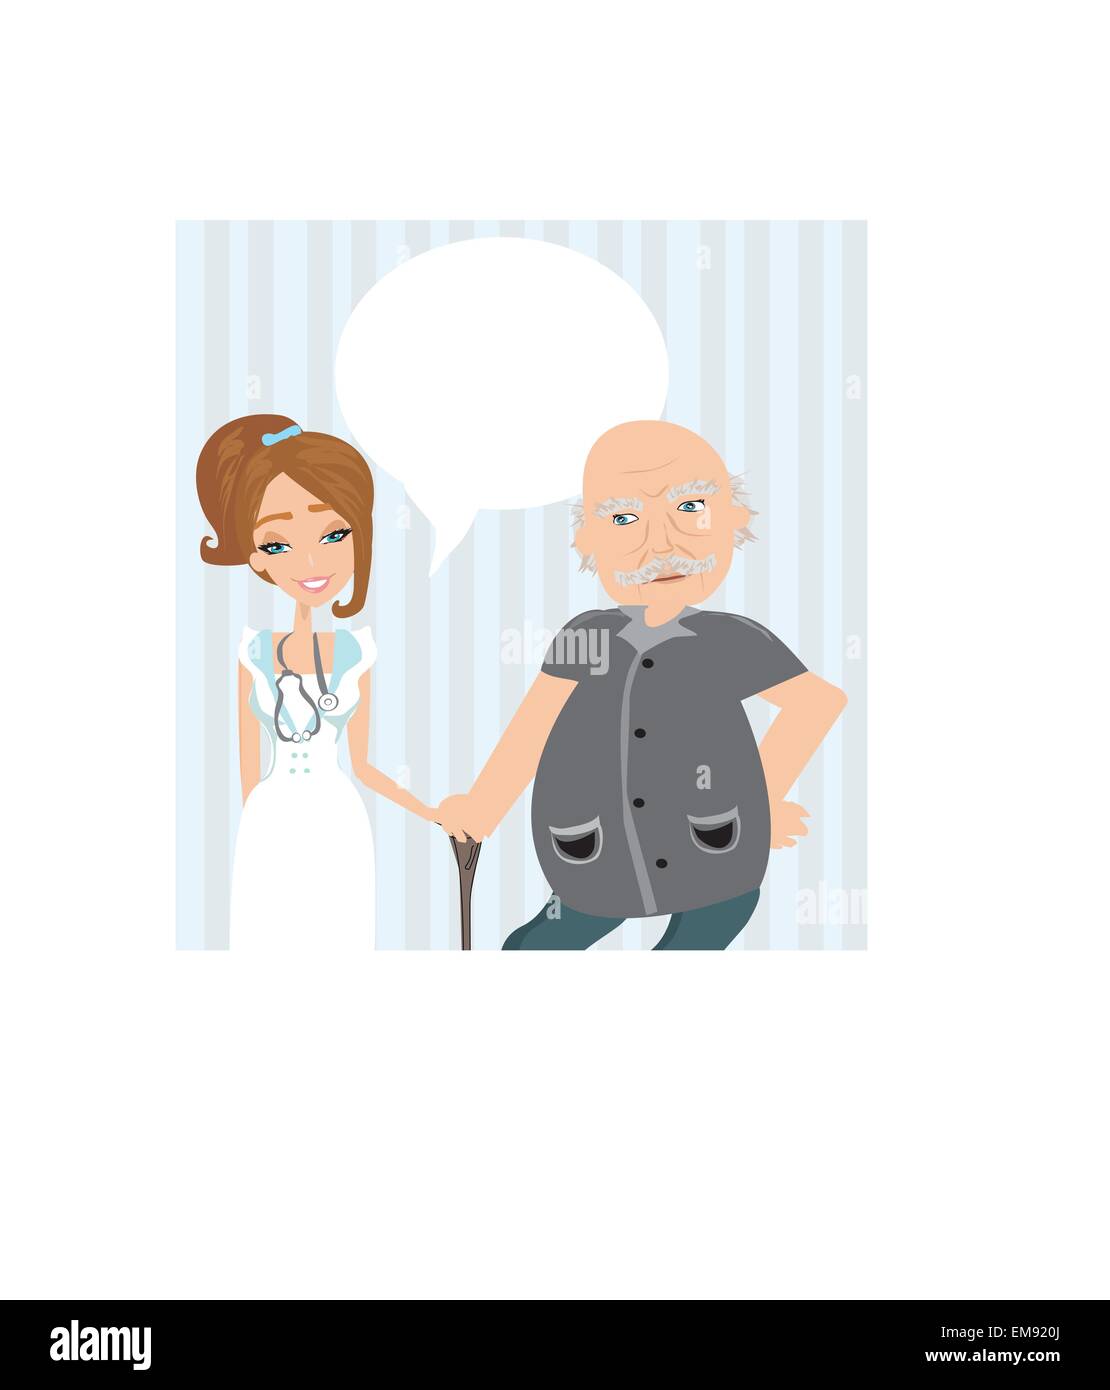 consultation with the doctor. Stock Vector